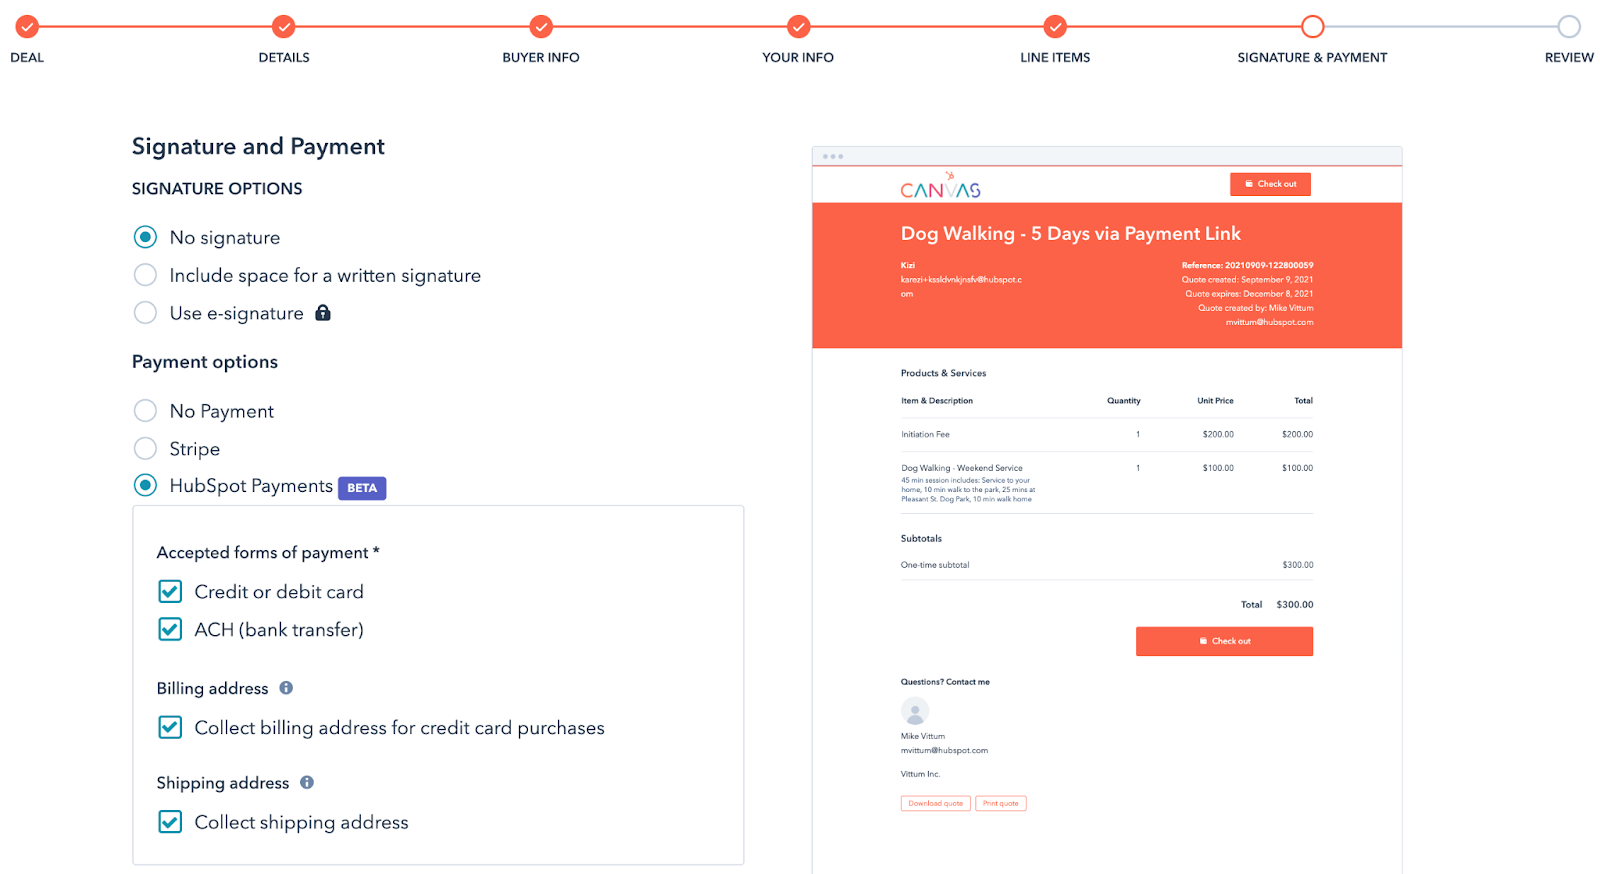 Setting up HubSpot's payments tool